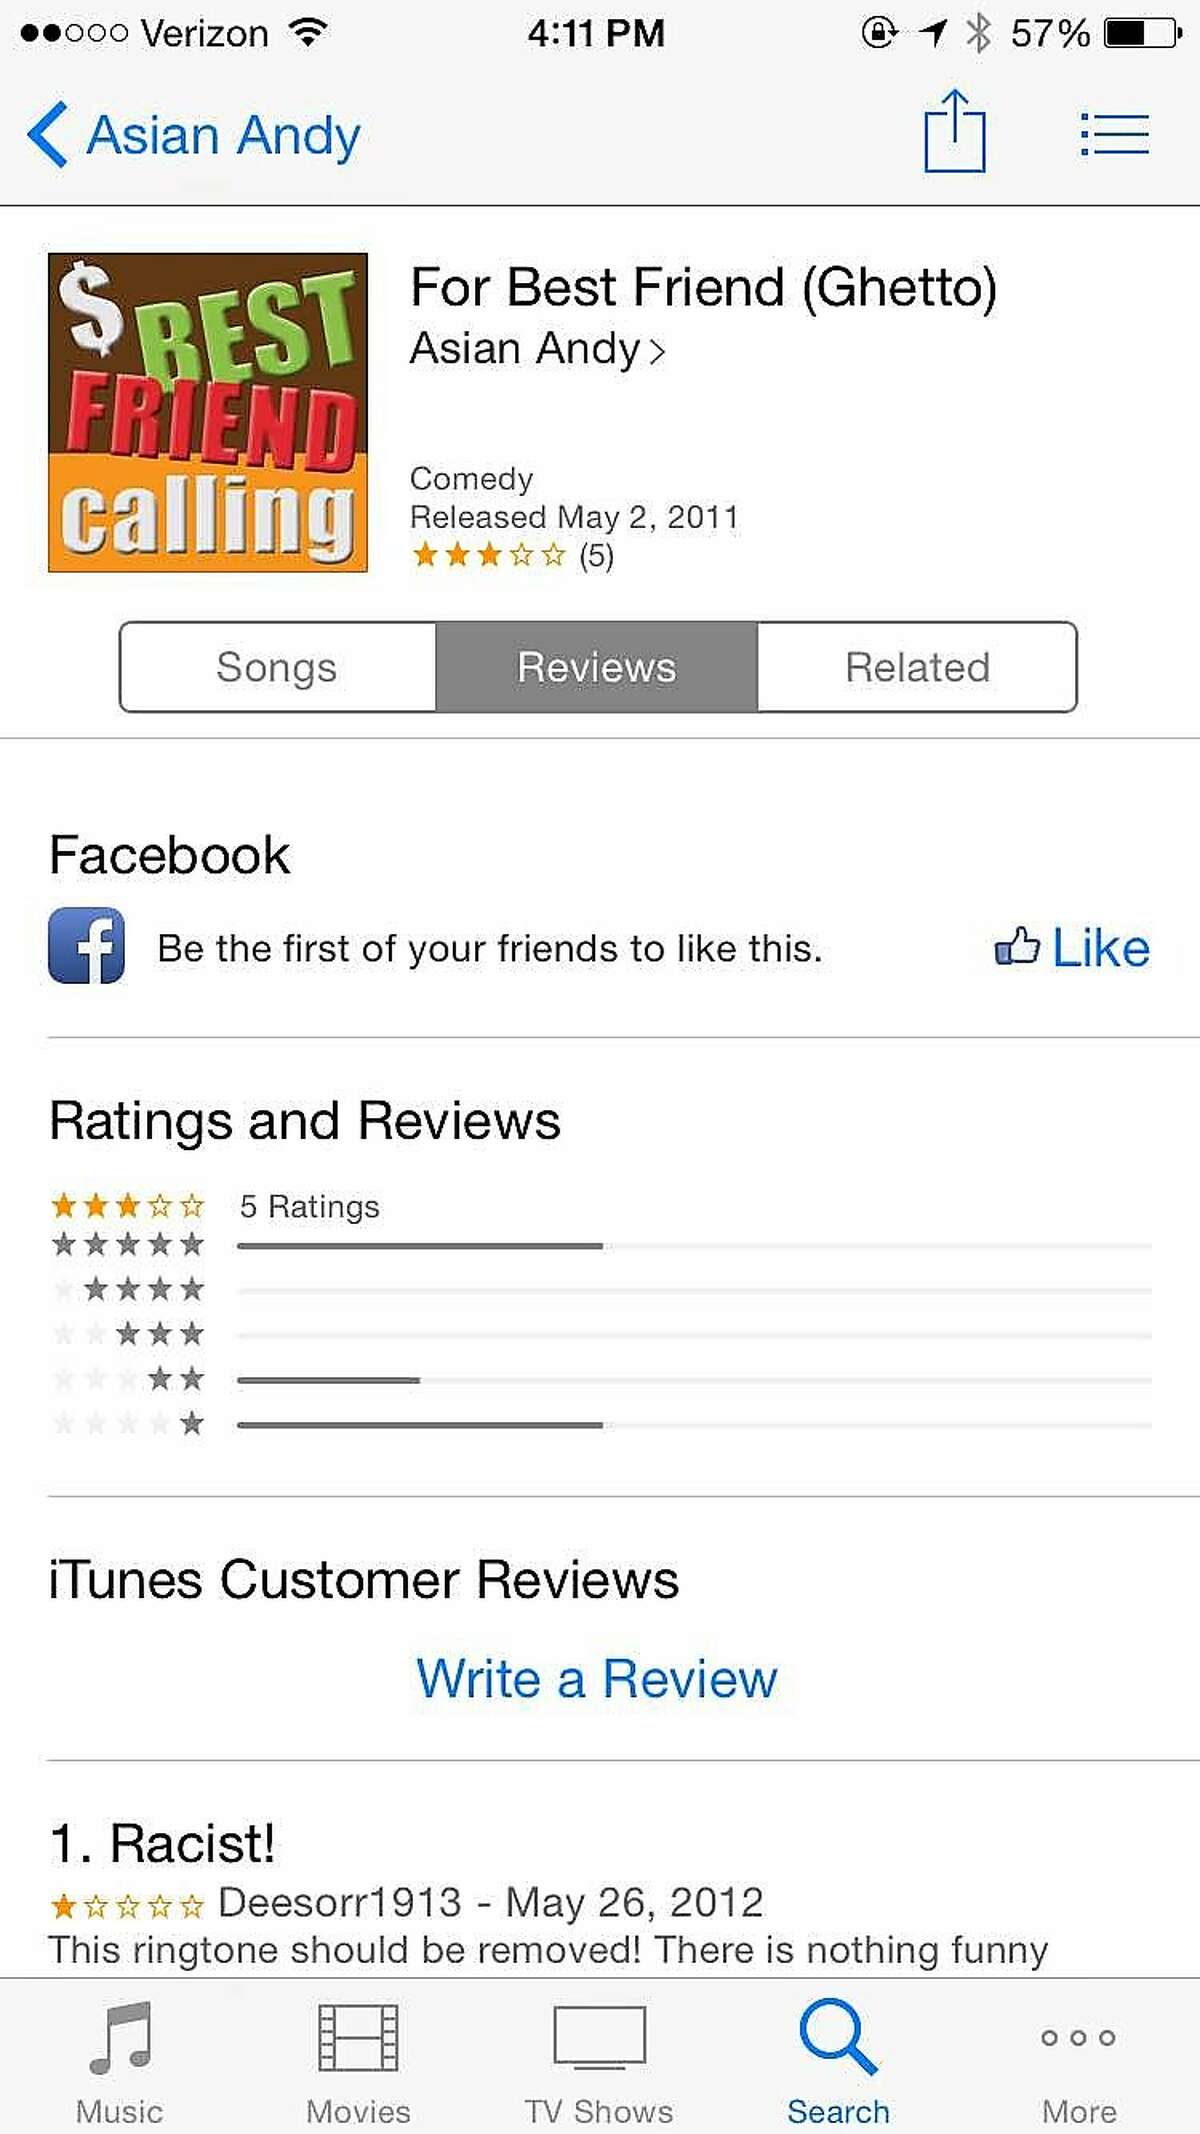 A screenshot of the ringtone, "For Best Friend (Ghetto)," which was available for purchase on iTunes since May 2, 2011. Apple's terms of use prohibit discriminatory ringtones, however many, like this, were allowed to exist unchecked for years. Apple removed dozens of offensive ringtones after a call from the San Francisco Chronicle this week.